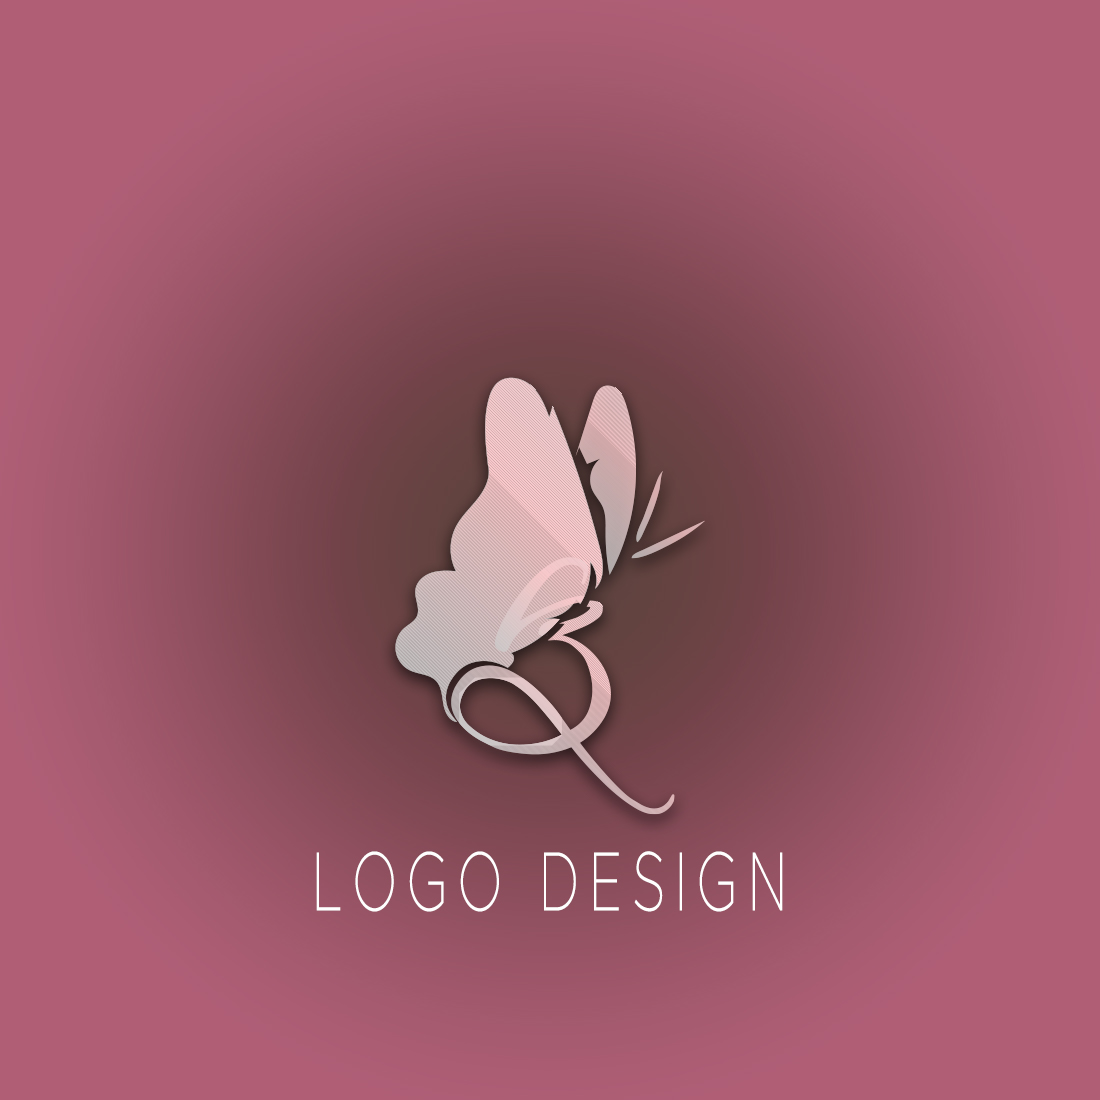 ROYAL BUTTERFLY LOGO DESIGN LUXERY LOGO vector cover image.